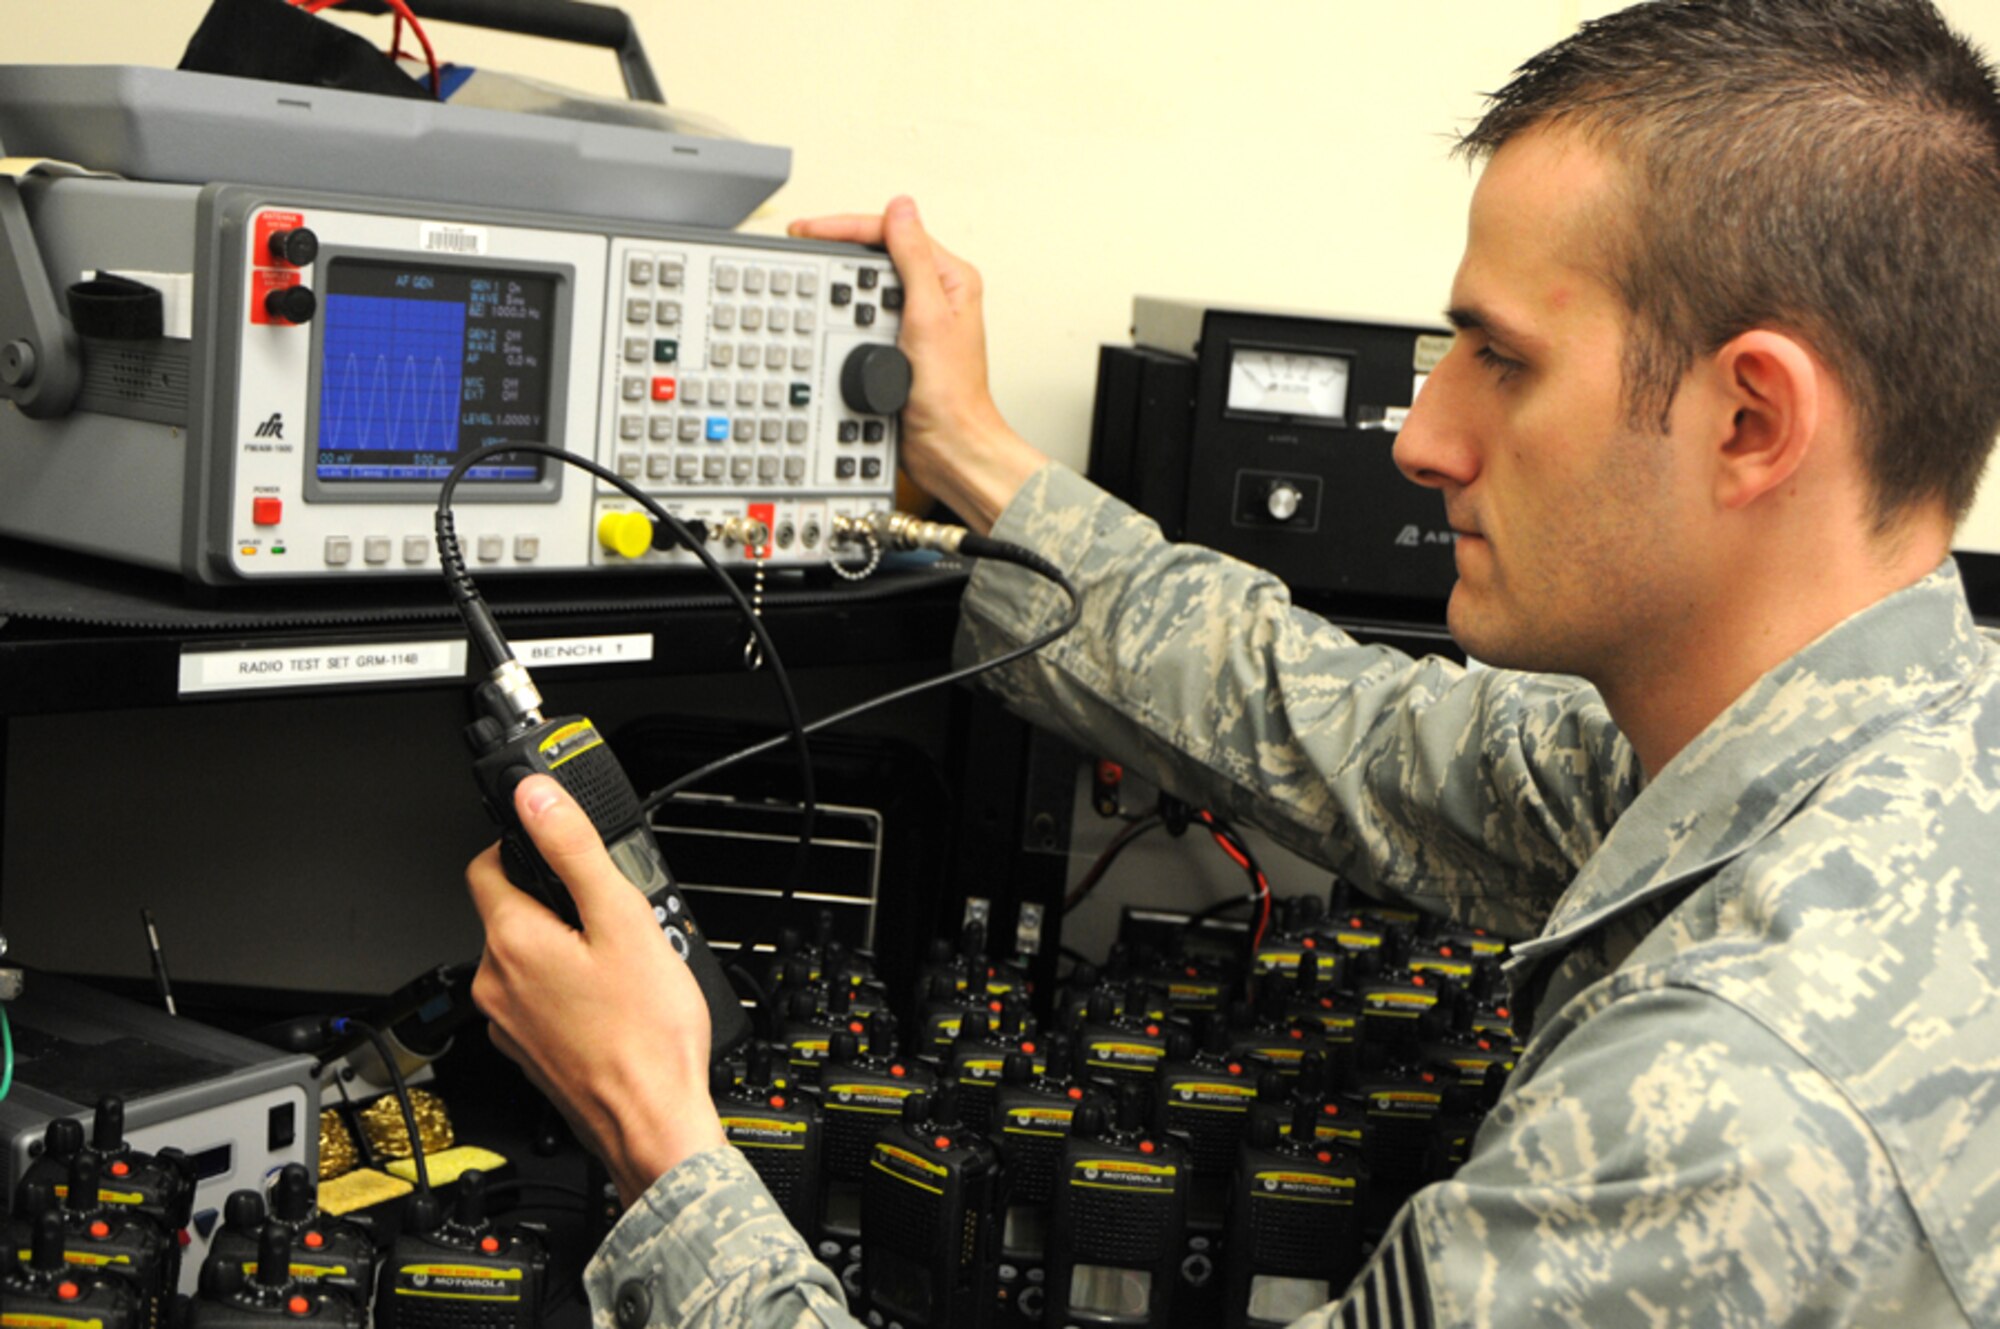 As more than 400 new radios arrived from National Guard Bureau on Apr. 24, Staff Sgt. Sean Bryson, from the 124th Communications Flight, finishes the final preparation on the encrypted radios by inspecting and testing every radio before issuing and distributing the radios to units on Gowen Field. Bryson tests power, frequency error, receive sensitivity, modulation and threshold squelch. (U.S. Air Force photo by Tech. Sgt. Becky Vanshur)